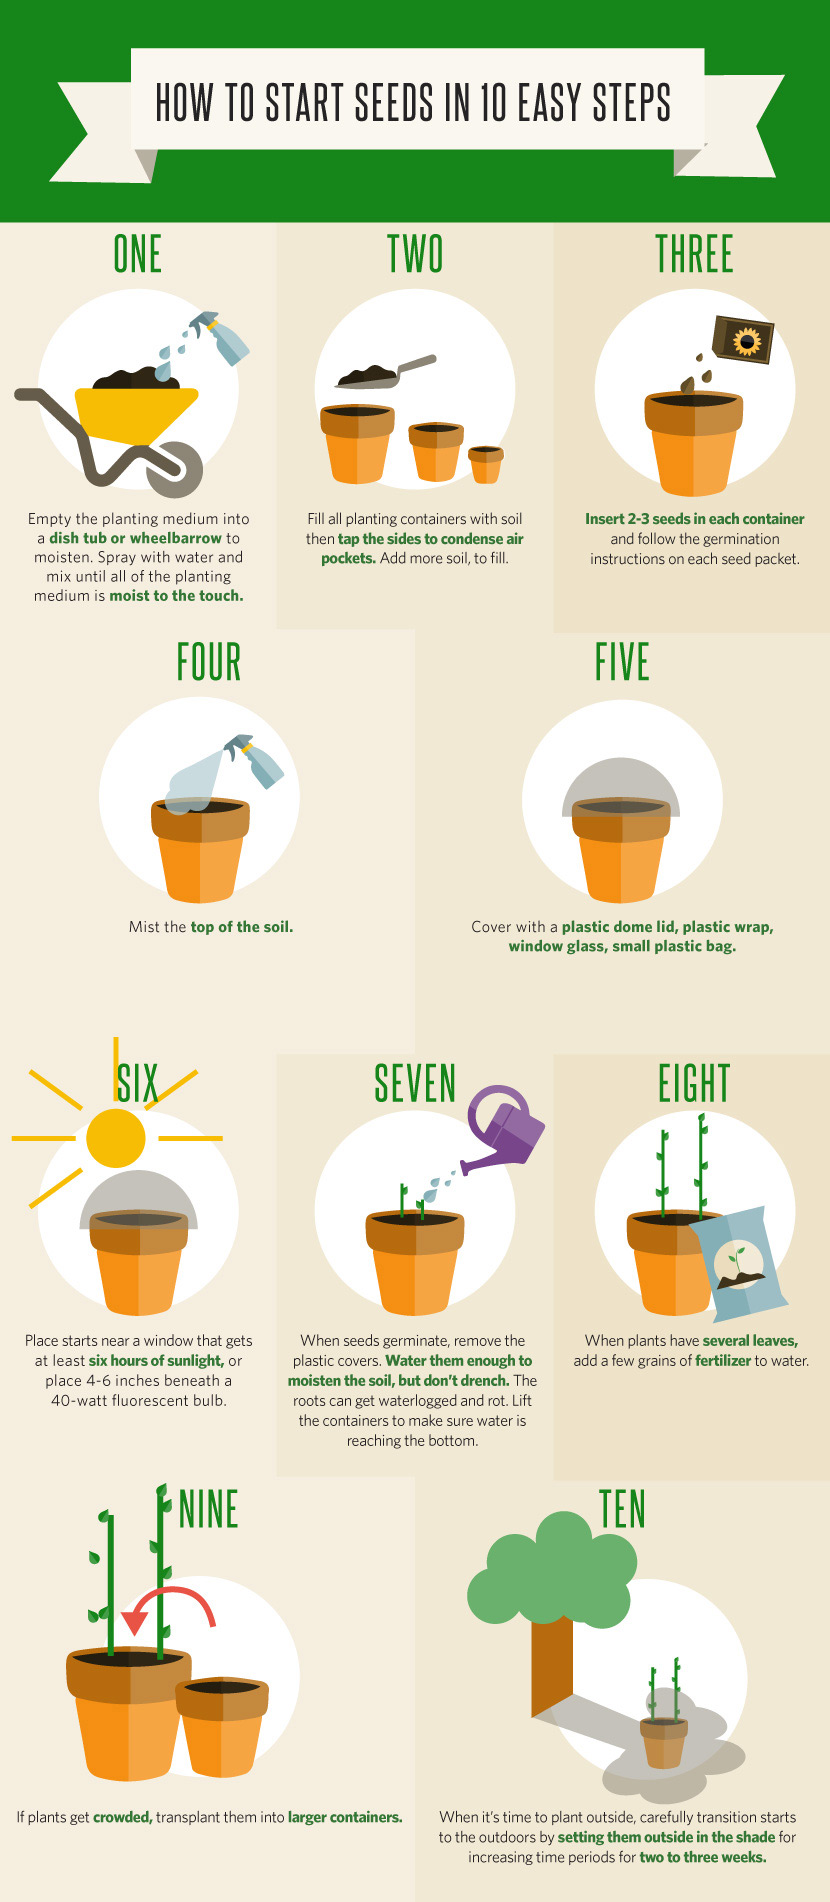 Getting Back Into Gardening After Winter: How To Start Seeds